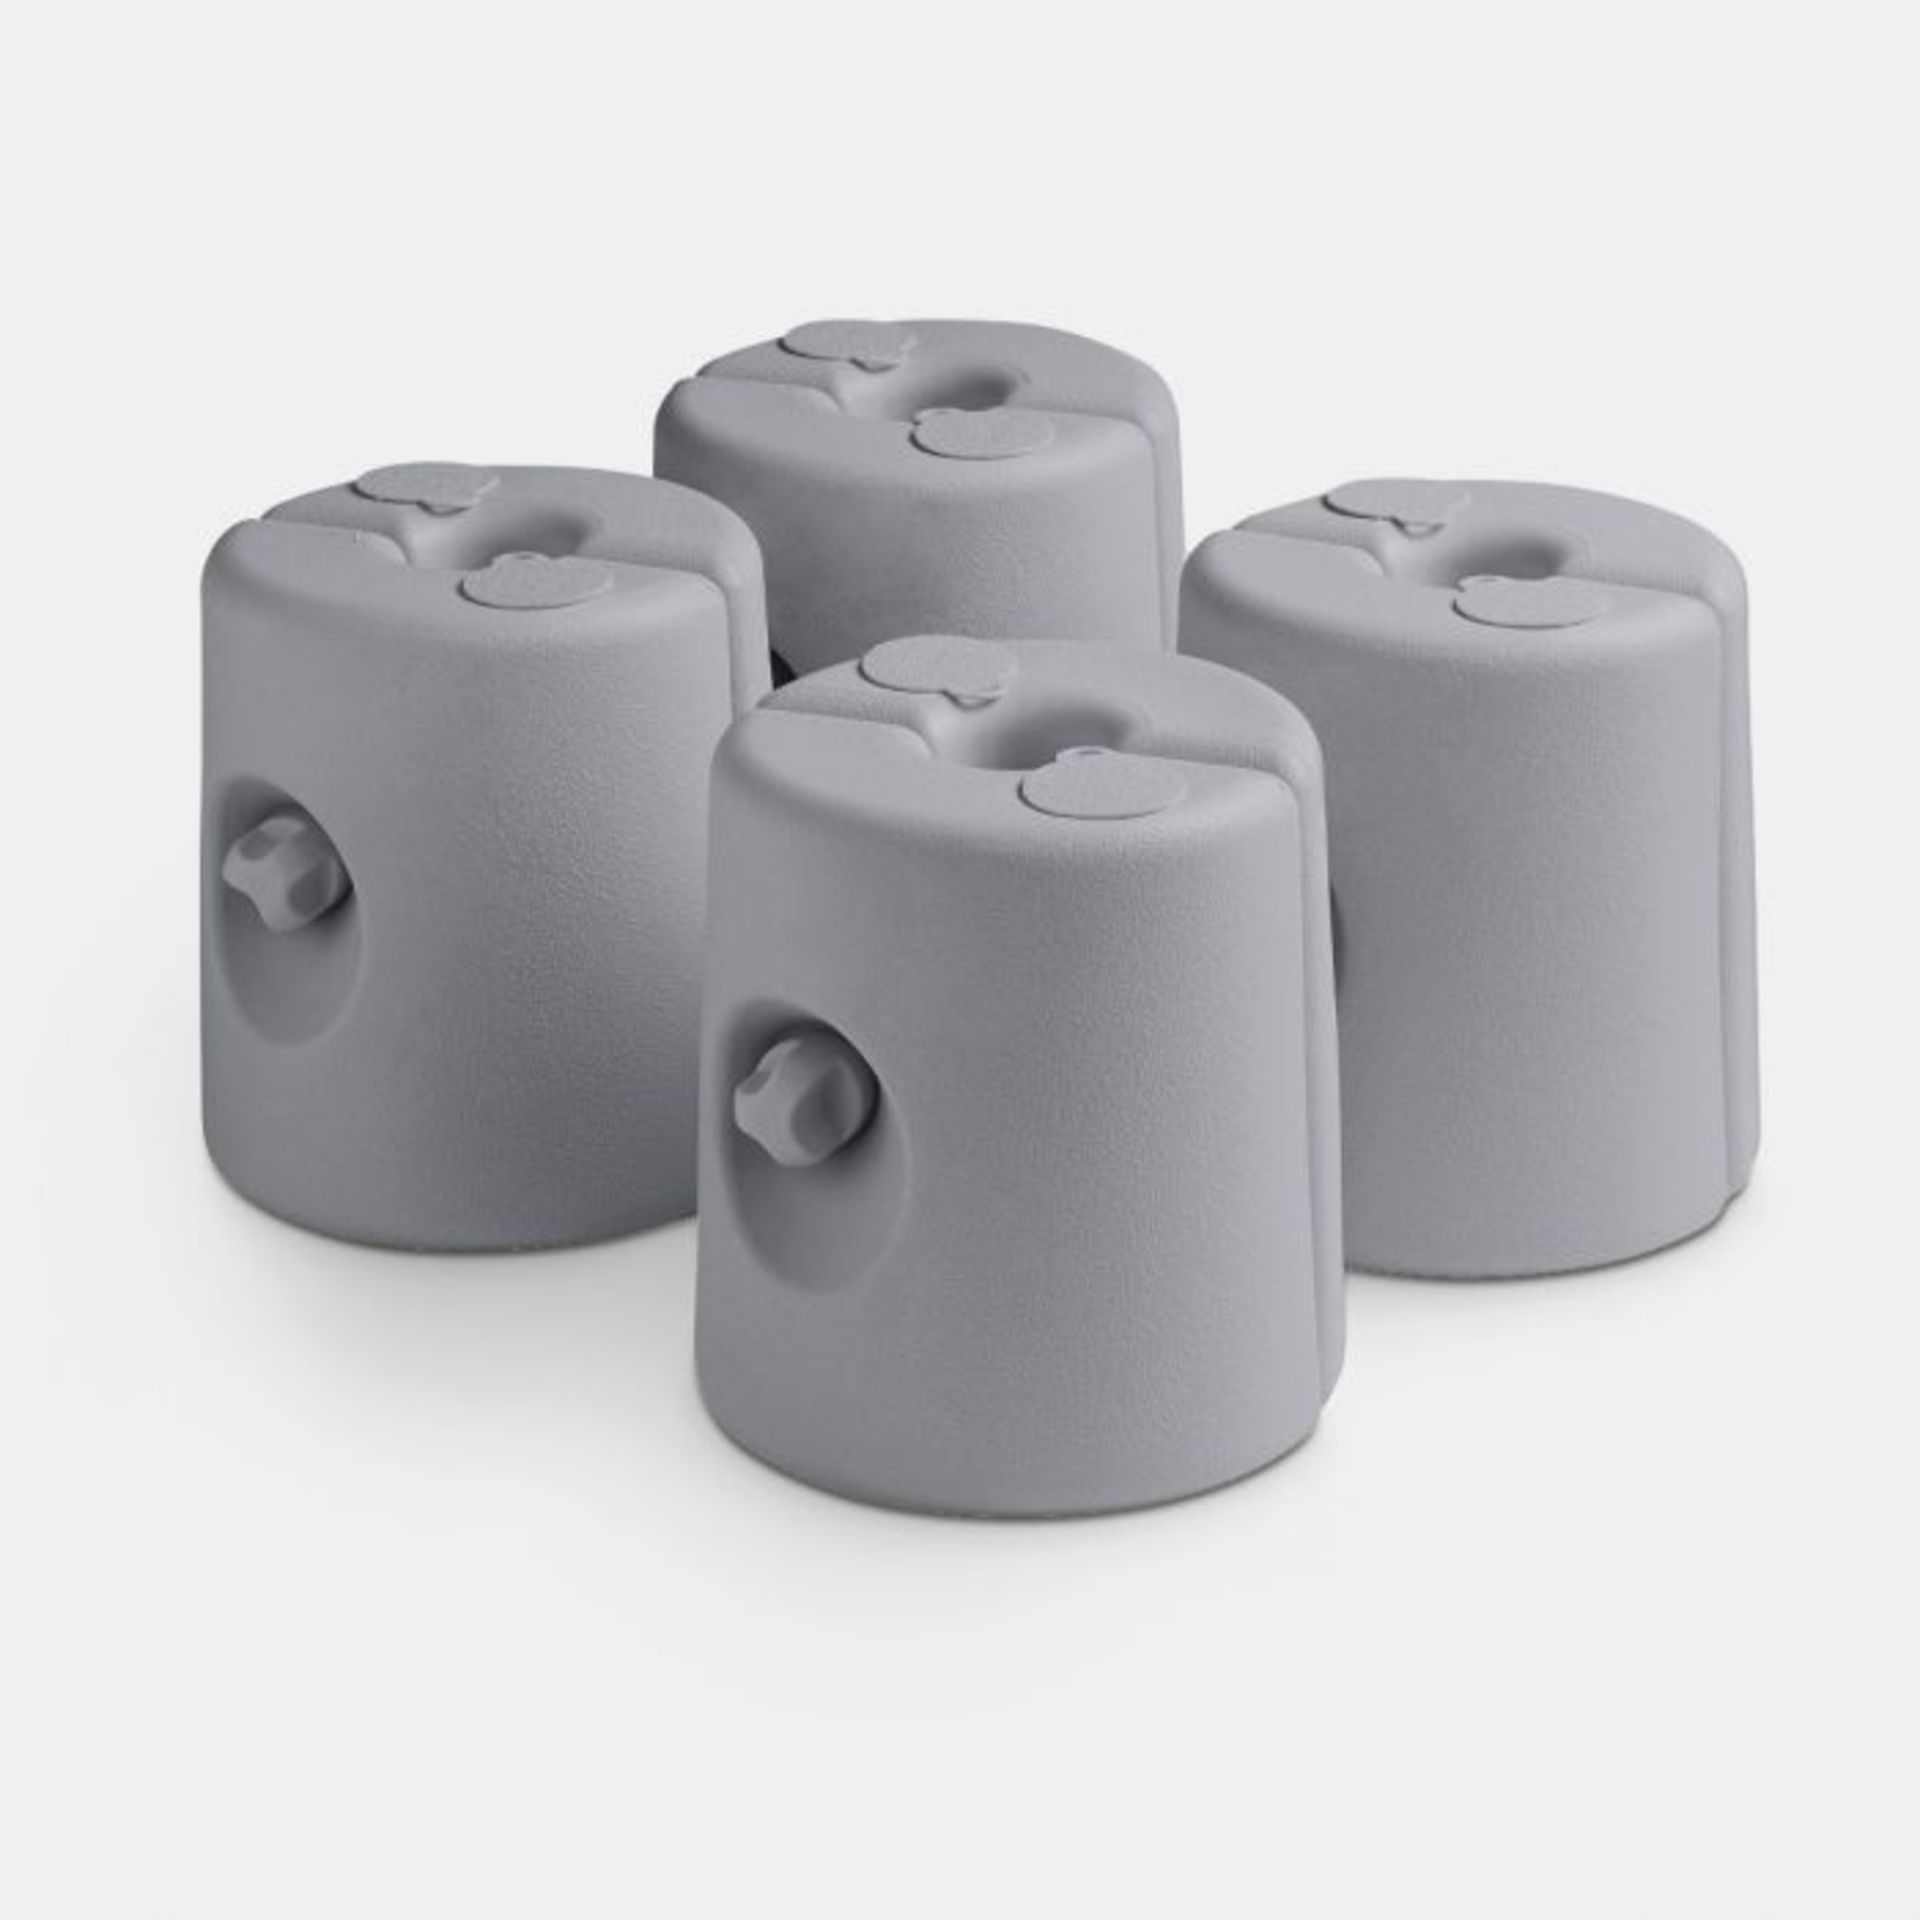 Gazebo Weights. This pack of 4 weights will ensure your gazebo or tent stays stable.